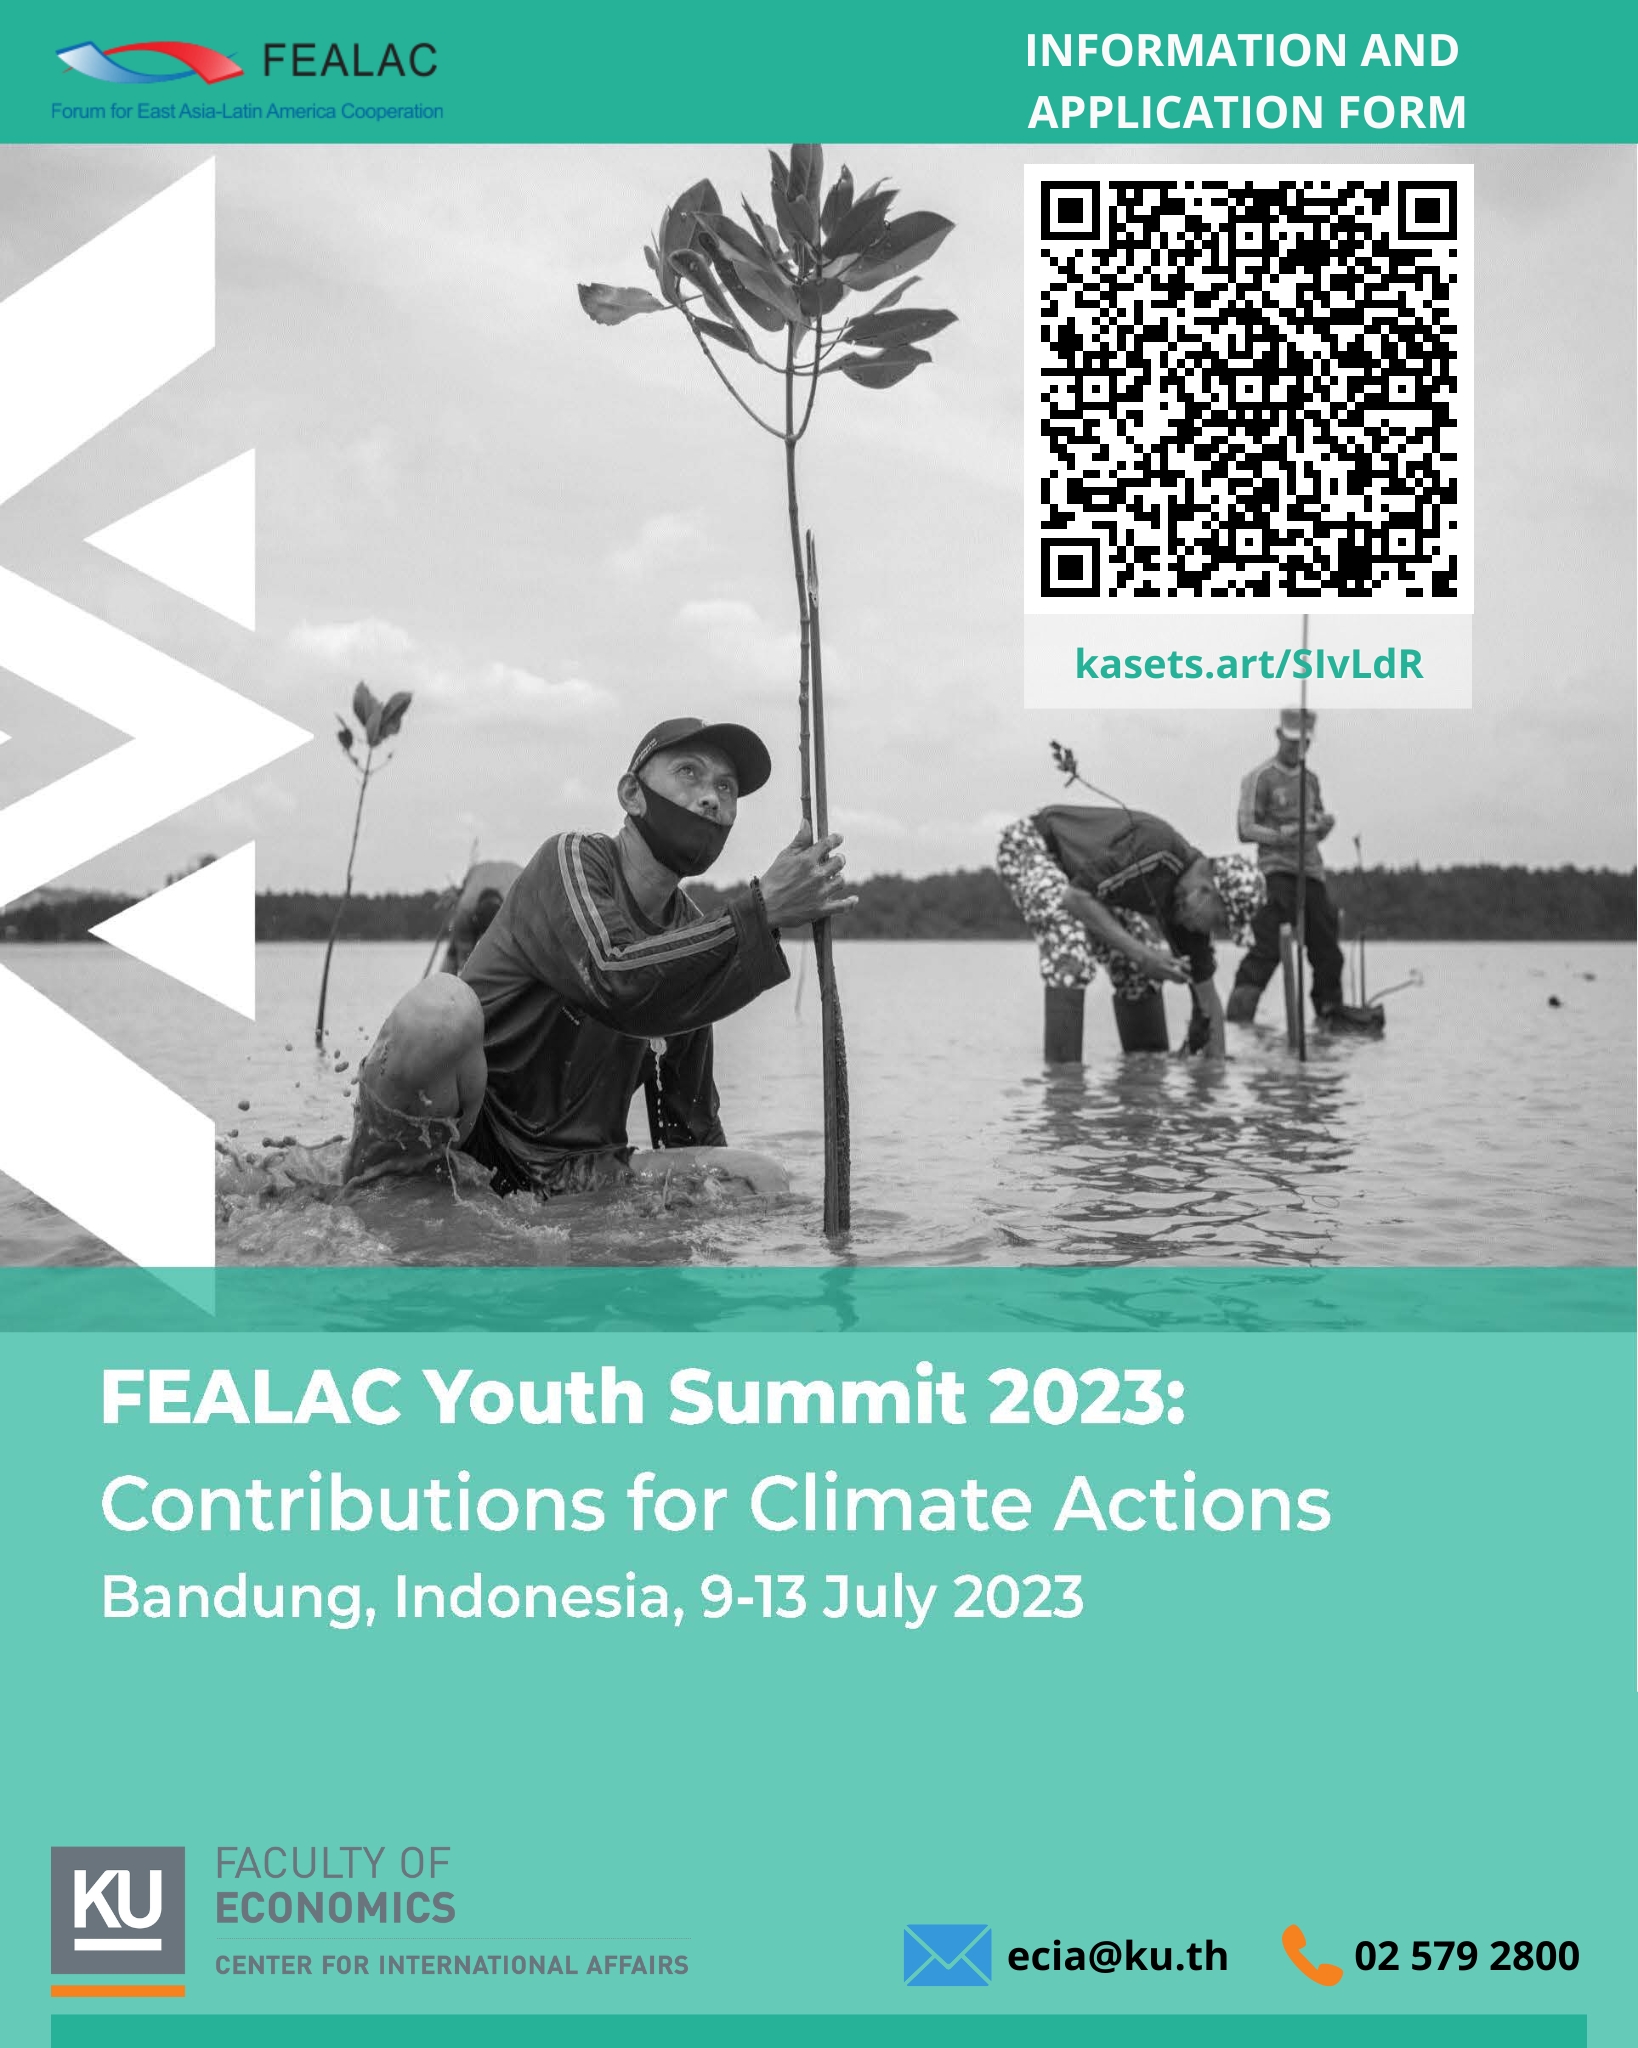 EALAC Youth Summit 2023 in Indonesia